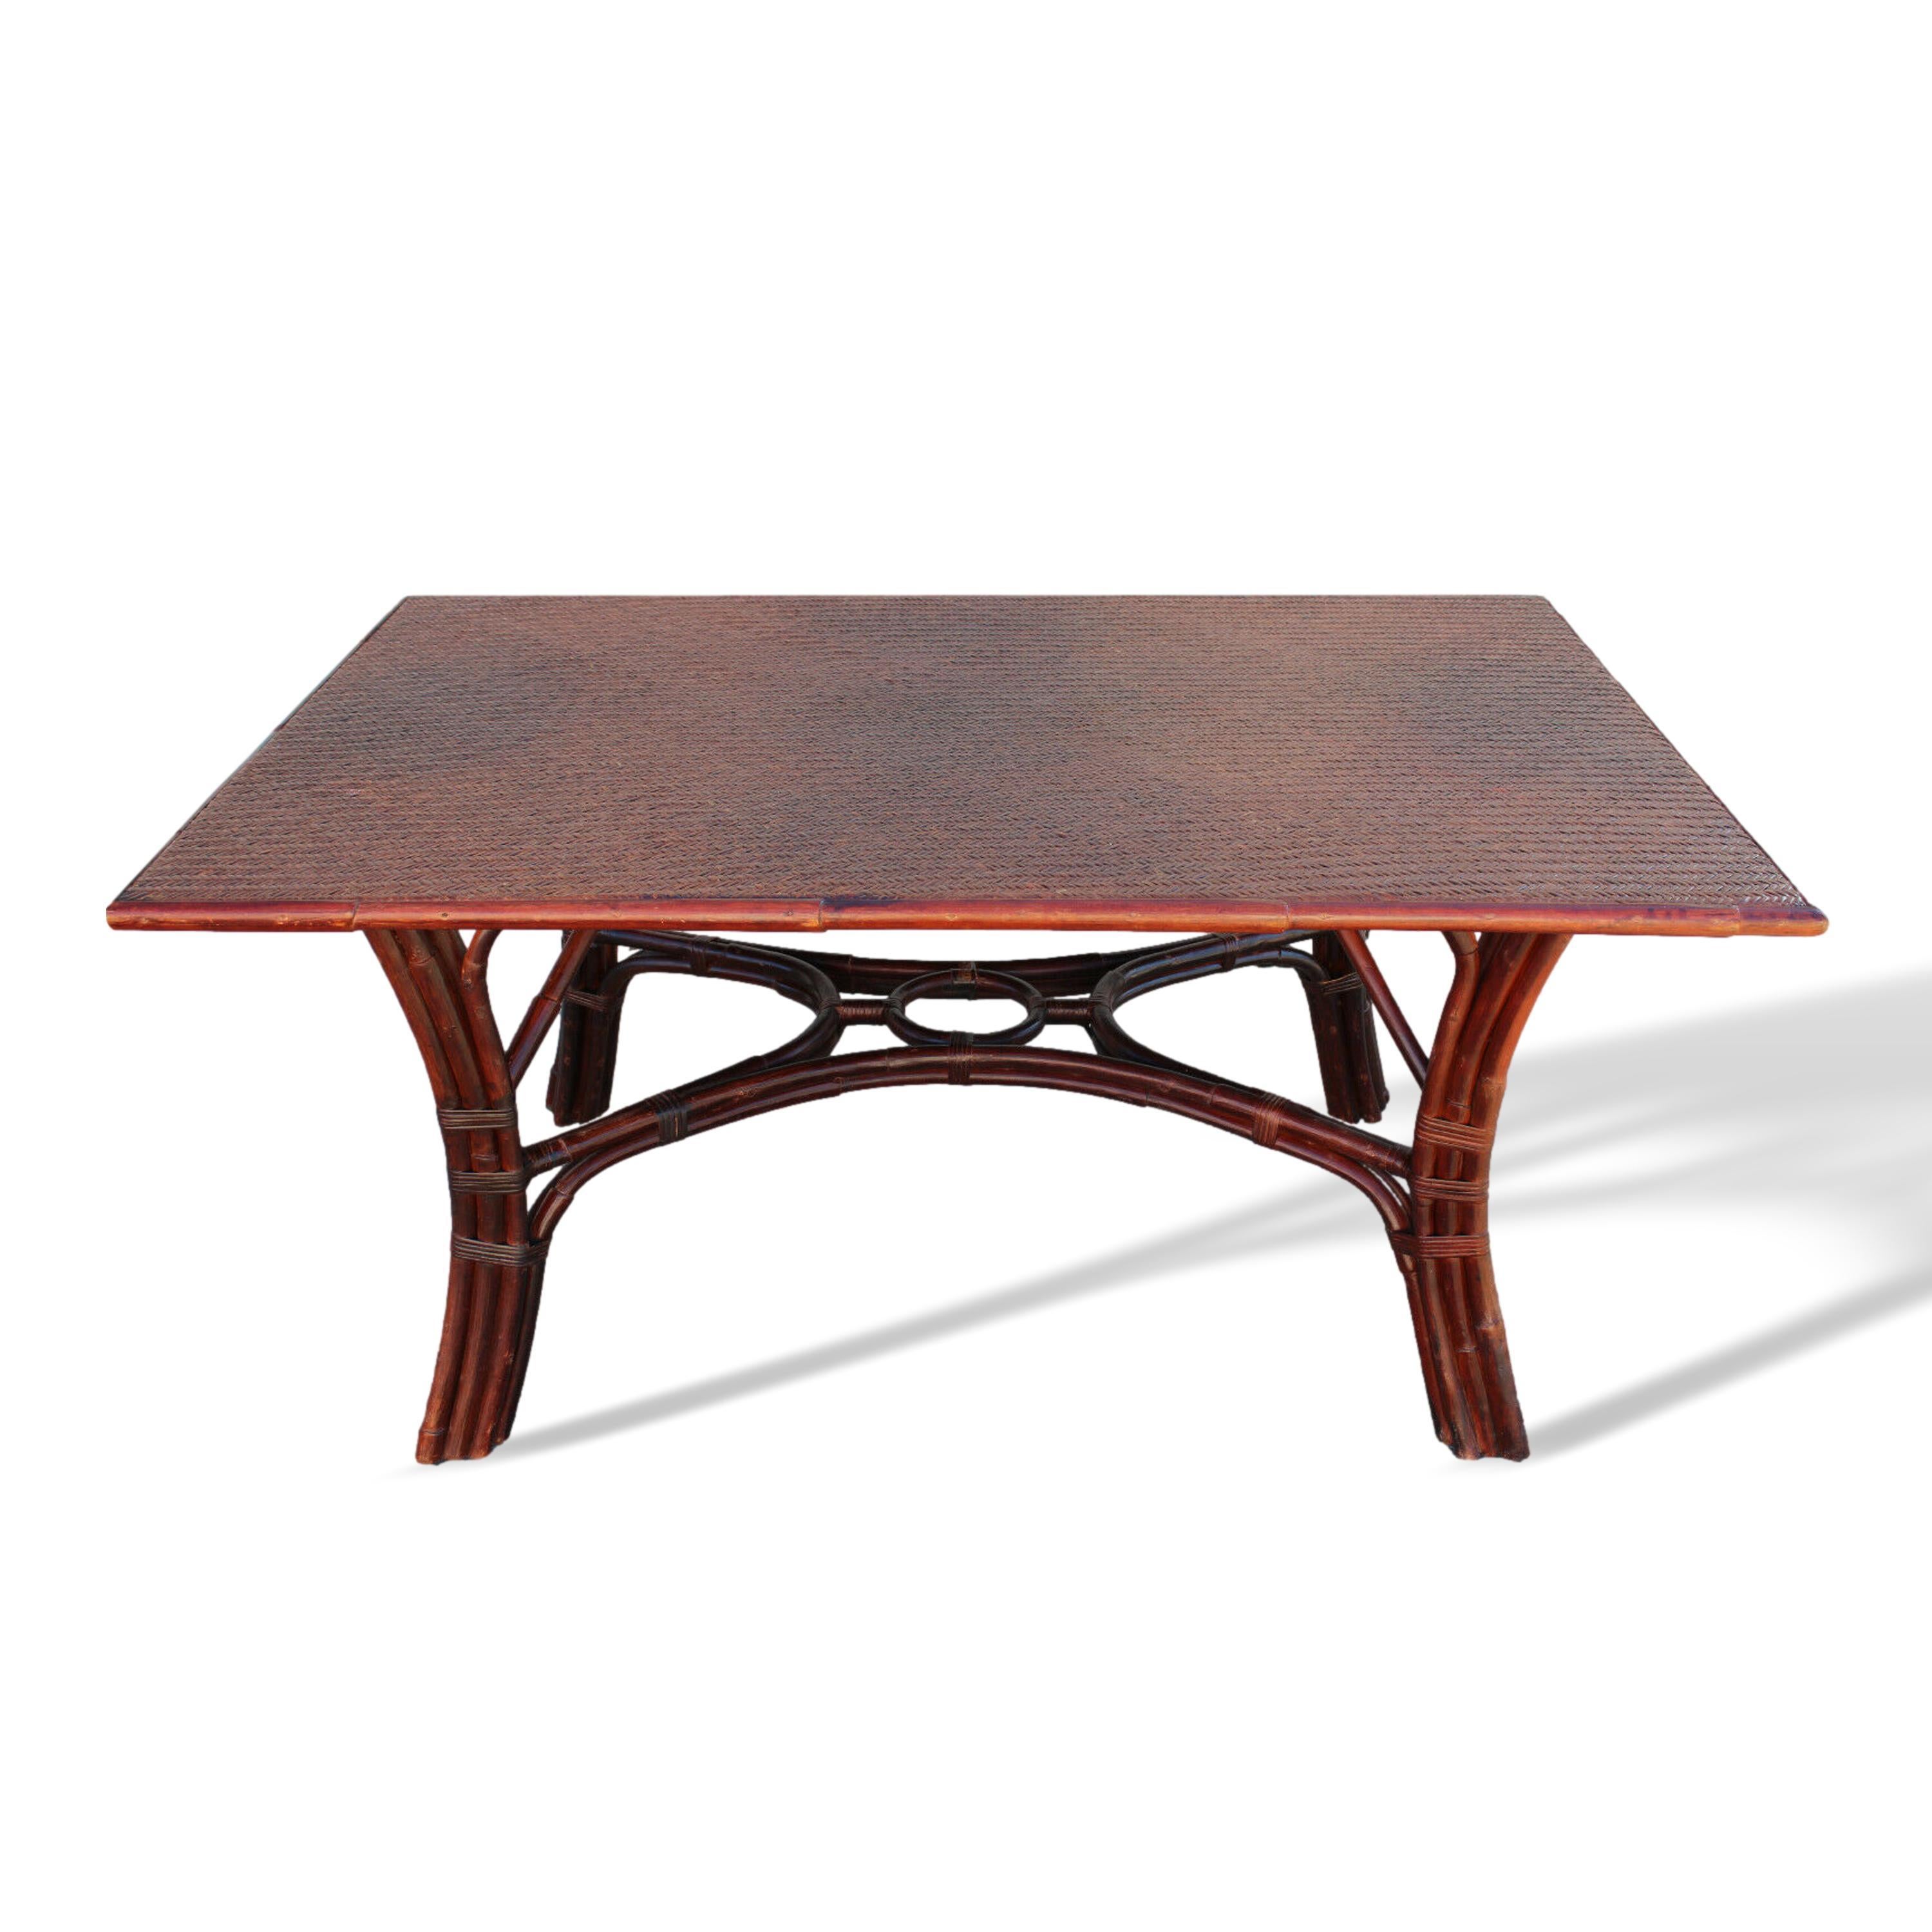 An exceptional vintage rattan dining table from Ralph Lauren Collection. Rectangular table has a woven rattan tabletop and retains the original rich mahogany finish.